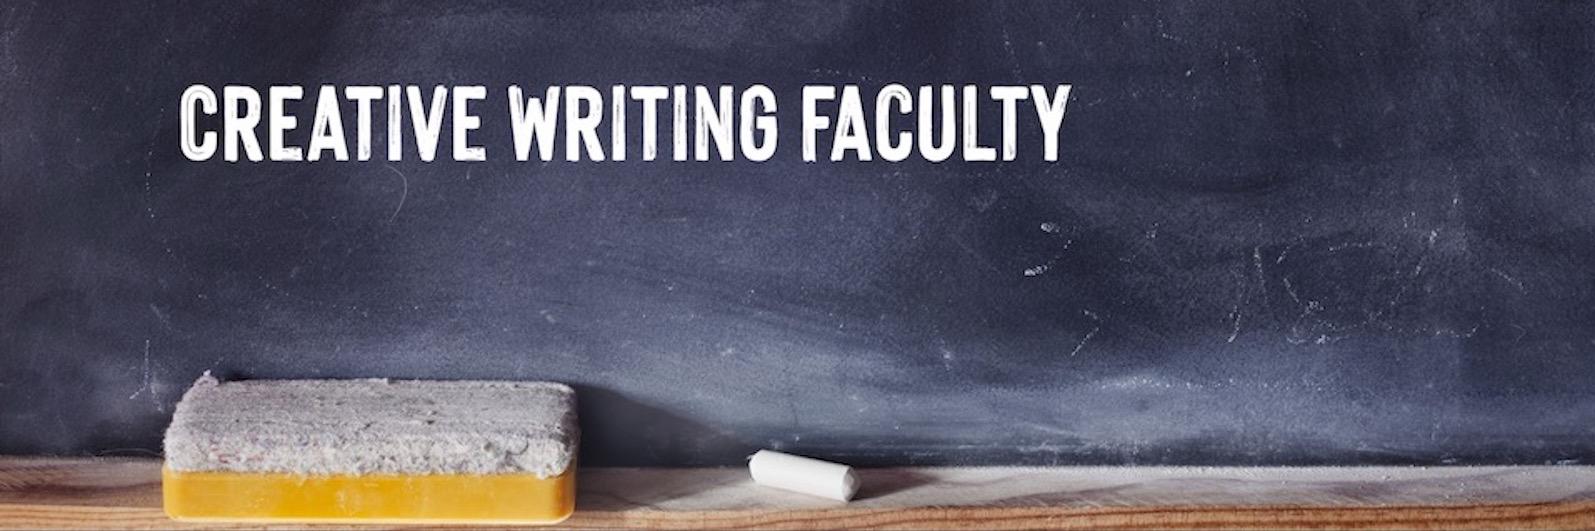 williams college creative writing faculty